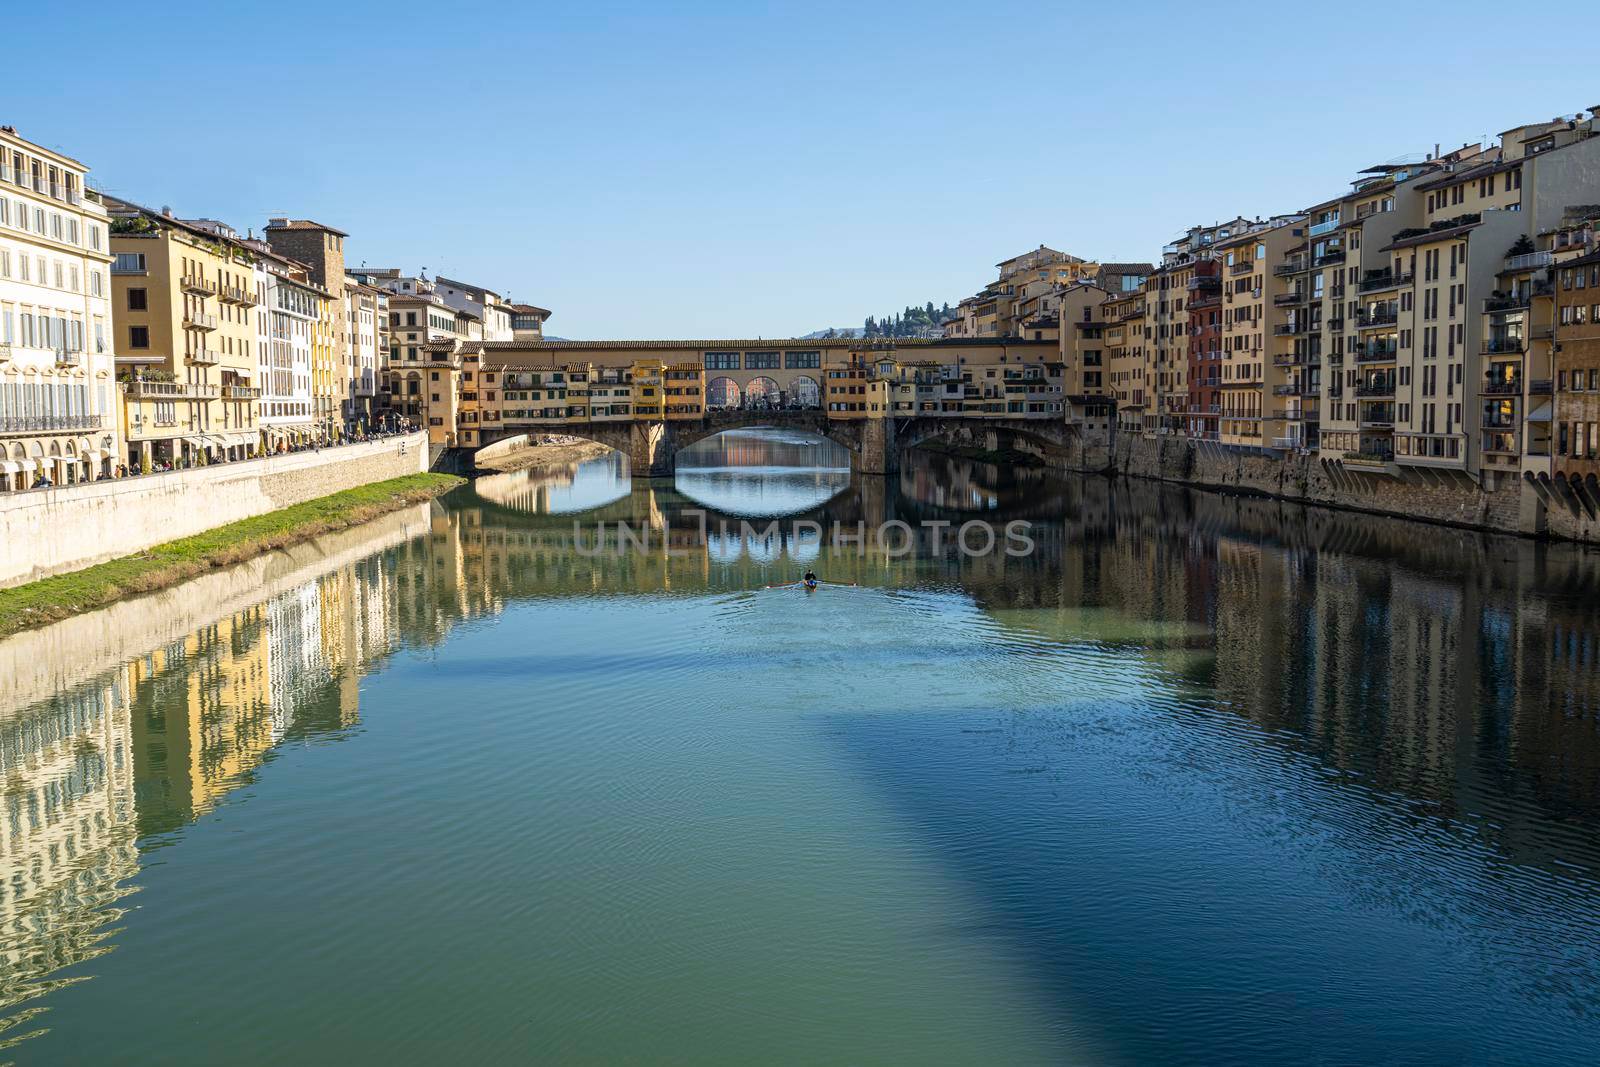 Ponte Vecchio in Florence, Italy by sergiodv